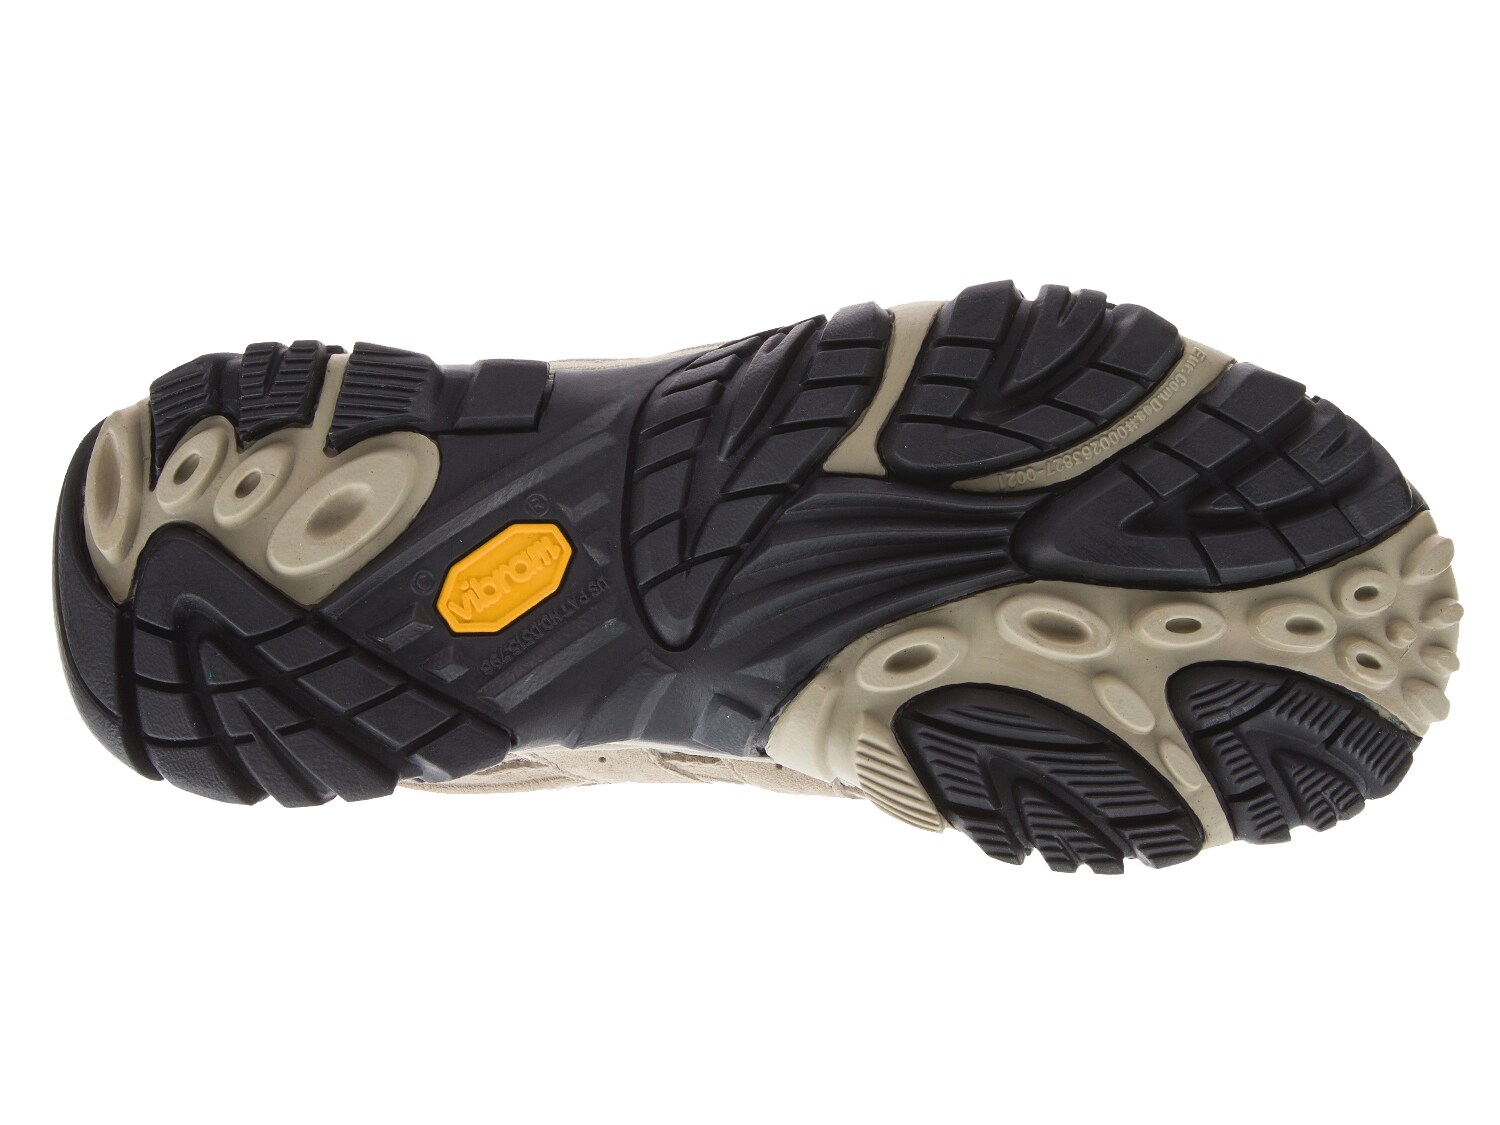 dsw merrell hiking shoes